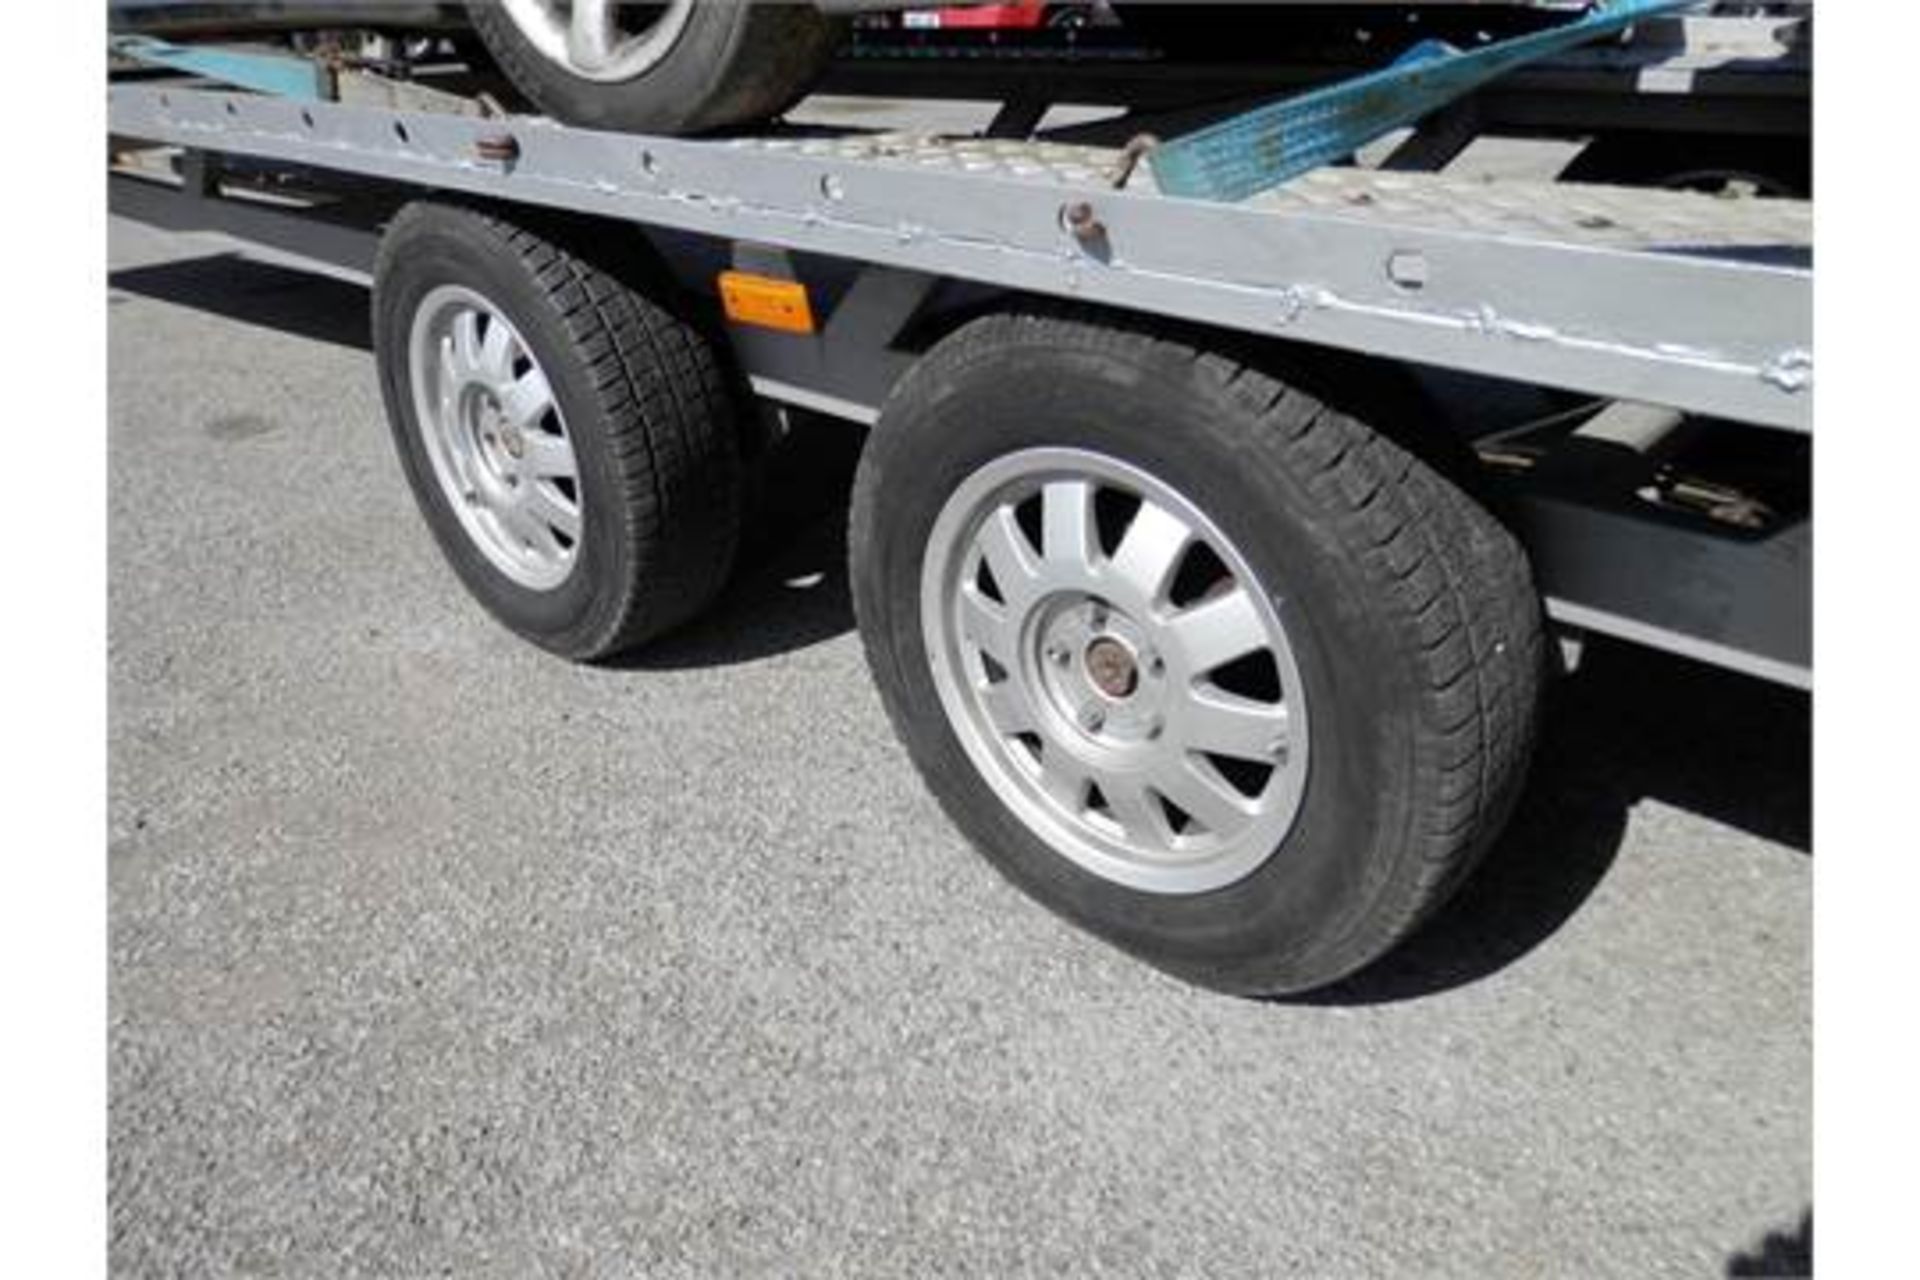 3400KG 2 CAR TRAILER, 2.5 TONNE CARRYING CAPACITY !! GOOD ALLOYS/TYRES & SPARE WHEEL. - Image 4 of 11